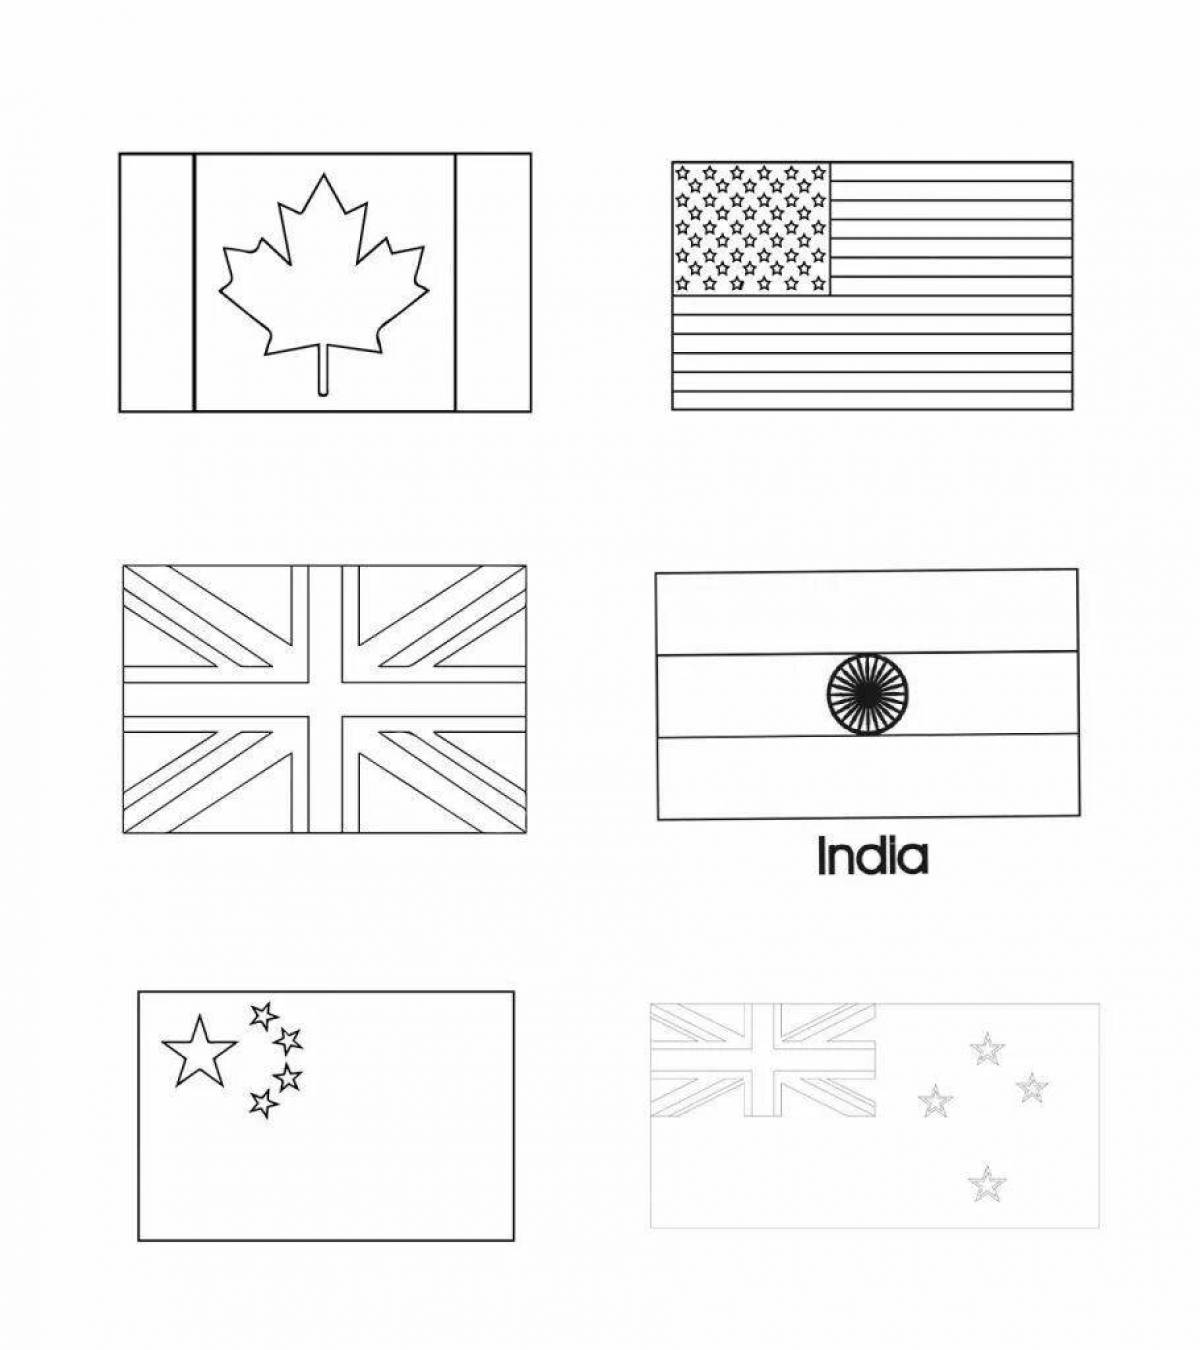 Colorful flags of the world coloring book for kids of all continents